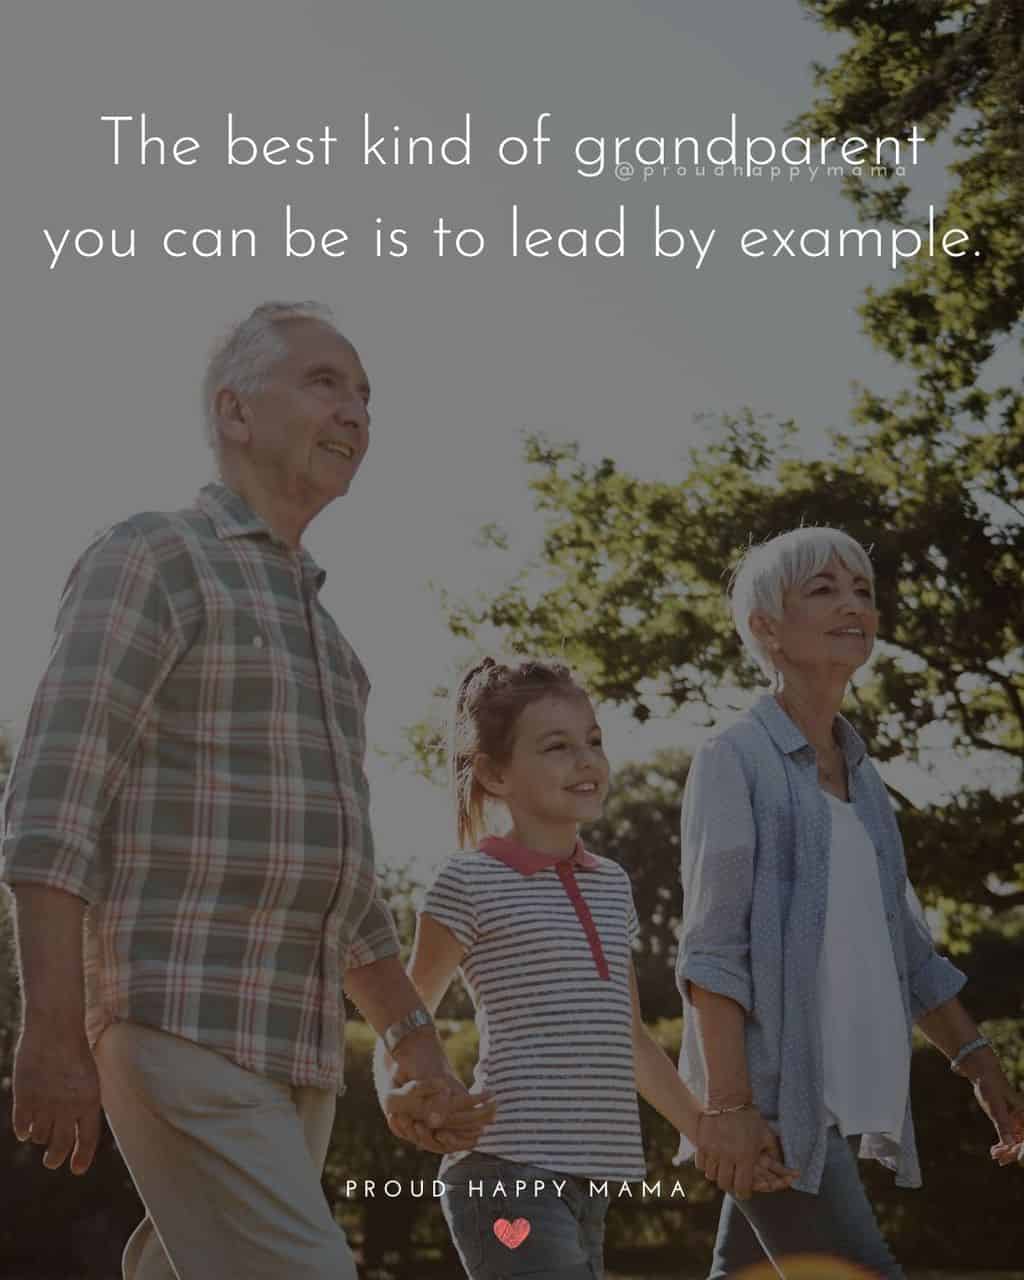 Grandparent Quotes – The best kind of grandparent you can be is to lead by example.’